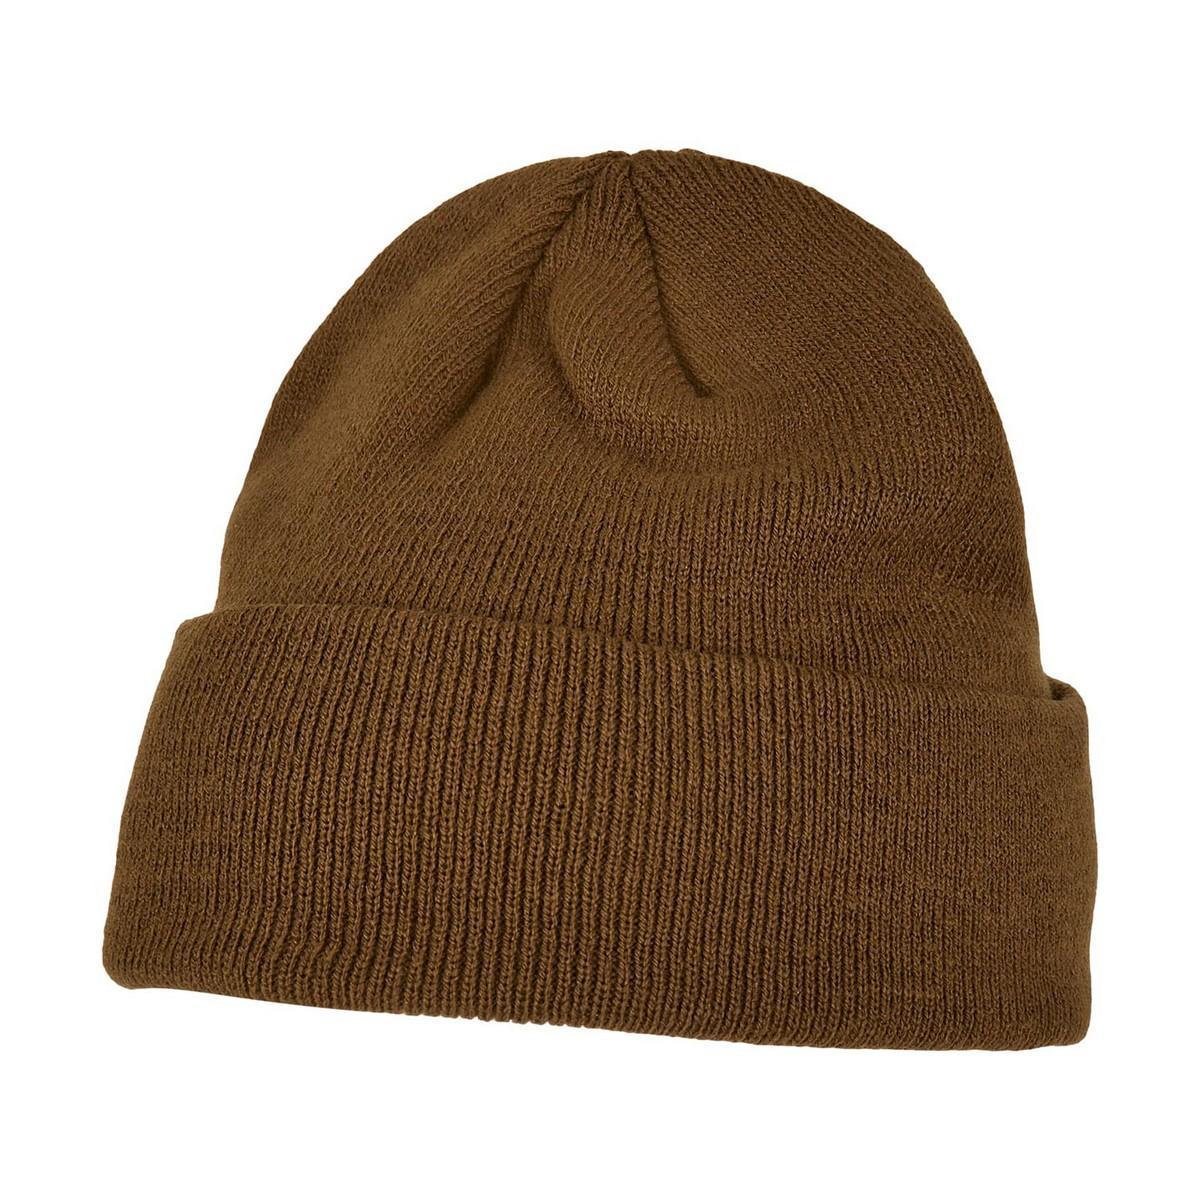 Build Your Brand Adults Unisex Heavy knit Beanie (Olive) (One Size)